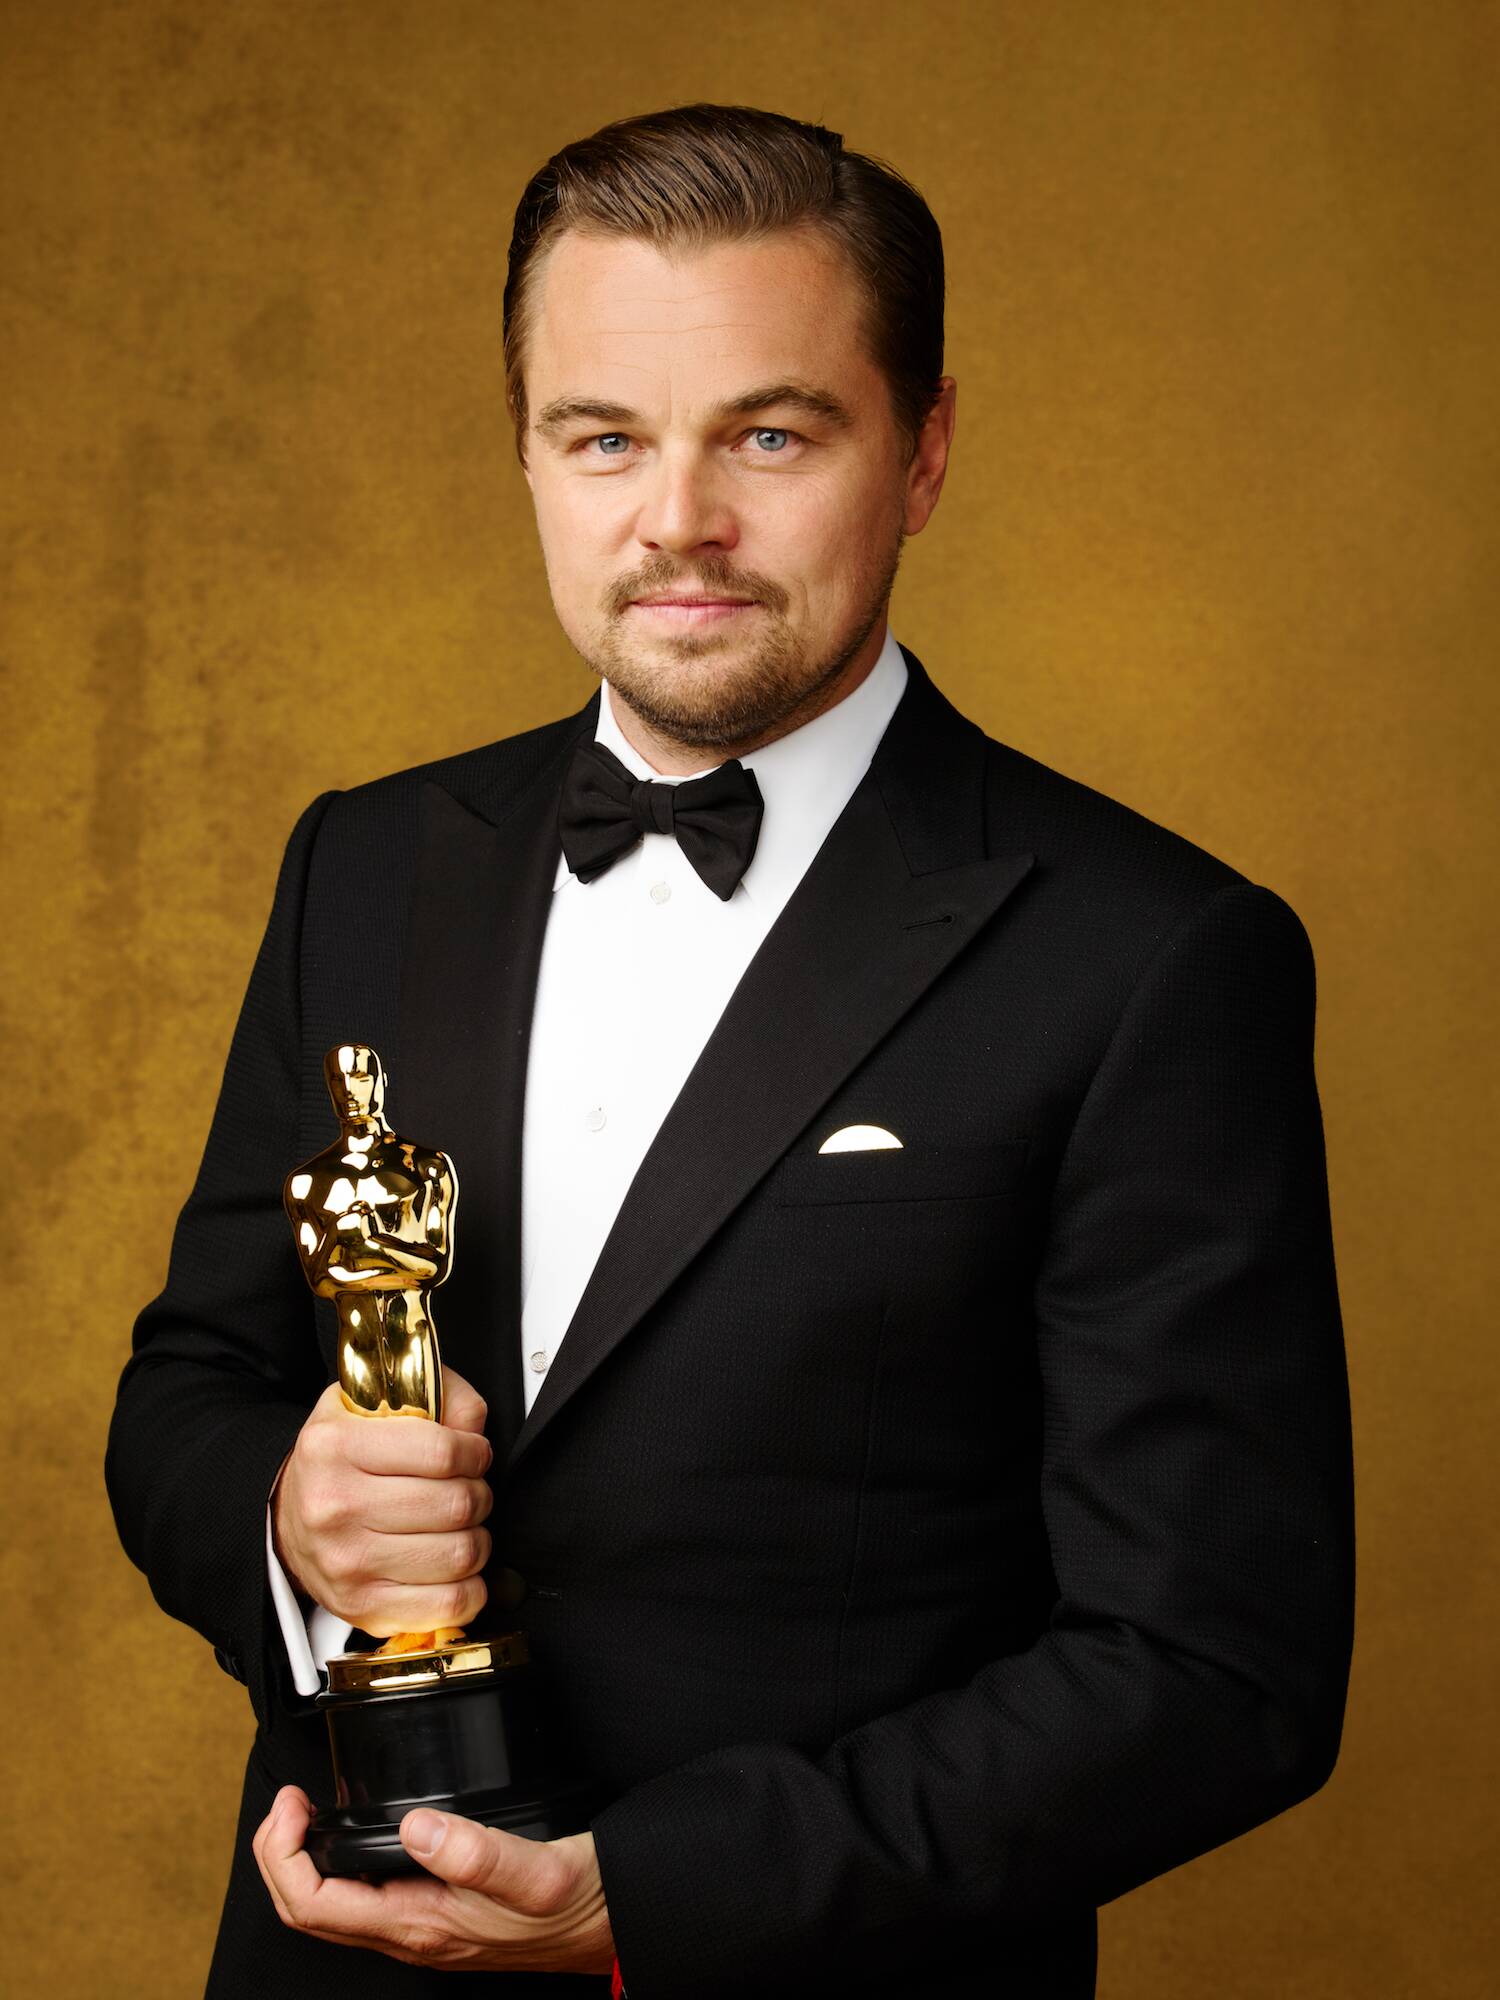 88th Oscars: Winners Portraits | Oscars.org | Academy of Motion Picture Arts and Sciences1500 x 2000